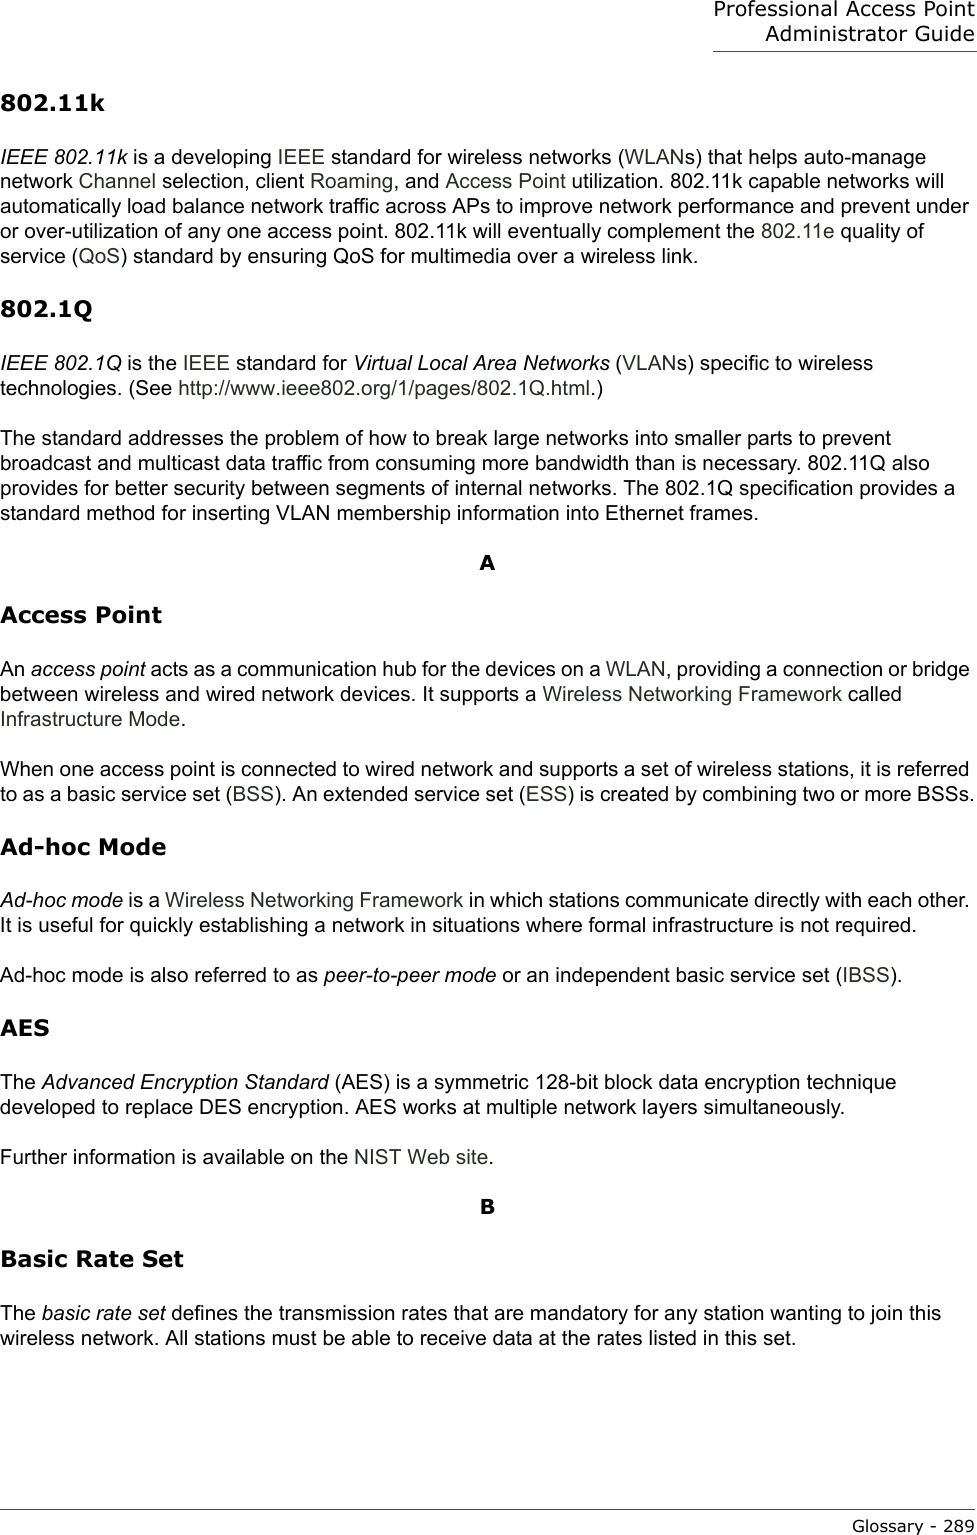 Professional Access Point Administrator GuideGlossary - 289802.11kIEEE 802.11k is a developing IEEE standard for wireless networks (WLANs) that helps auto-manage network Channel selection, client Roaming, and Access Point utilization. 802.11k capable networks will automatically load balance network traffic across APs to improve network performance and prevent under or over-utilization of any one access point. 802.11k will eventually complement the 802.11e quality of service (QoS) standard by ensuring QoS for multimedia over a wireless link. 802.1QIEEE 802.1Q is the IEEE standard for Virtual Local Area Networks (VLANs) specific to wireless technologies. (See http://www.ieee802.org/1/pages/802.1Q.html.)The standard addresses the problem of how to break large networks into smaller parts to prevent broadcast and multicast data traffic from consuming more bandwidth than is necessary. 802.11Q also provides for better security between segments of internal networks. The 802.1Q specification provides a standard method for inserting VLAN membership information into Ethernet frames.AAccess PointAn access point acts as a communication hub for the devices on a WLAN, providing a connection or bridge between wireless and wired network devices. It supports a Wireless Networking Framework called Infrastructure Mode.When one access point is connected to wired network and supports a set of wireless stations, it is referred to as a basic service set (BSS). An extended service set (ESS) is created by combining two or more BSSs.Ad-hoc ModeAd-hoc mode is a Wireless Networking Framework in which stations communicate directly with each other. It is useful for quickly establishing a network in situations where formal infrastructure is not required.Ad-hoc mode is also referred to as peer-to-peer mode or an independent basic service set (IBSS).AESThe Advanced Encryption Standard (AES) is a symmetric 128-bit block data encryption technique developed to replace DES encryption. AES works at multiple network layers simultaneously.Further information is available on the NIST Web site.BBasic Rate SetThe basic rate set defines the transmission rates that are mandatory for any station wanting to join this wireless network. All stations must be able to receive data at the rates listed in this set. 